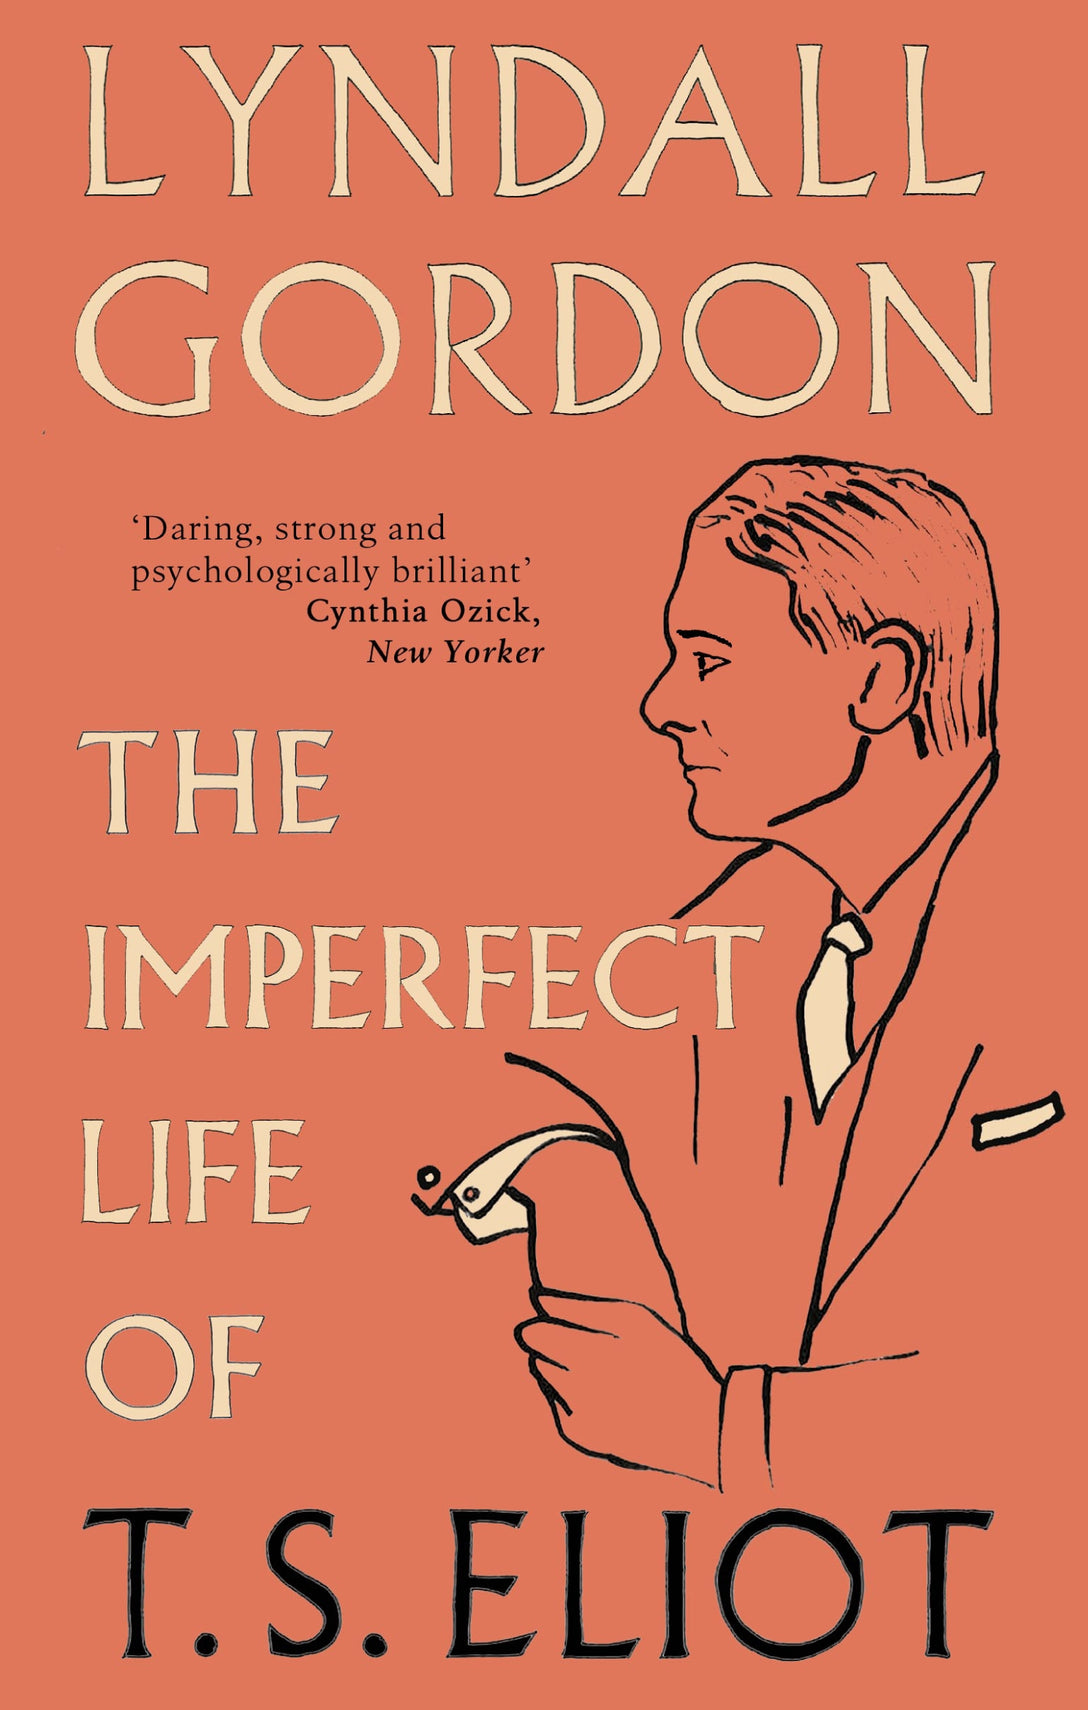 The Imperfect Life of T. S. Eliot by Lyndall Gordon